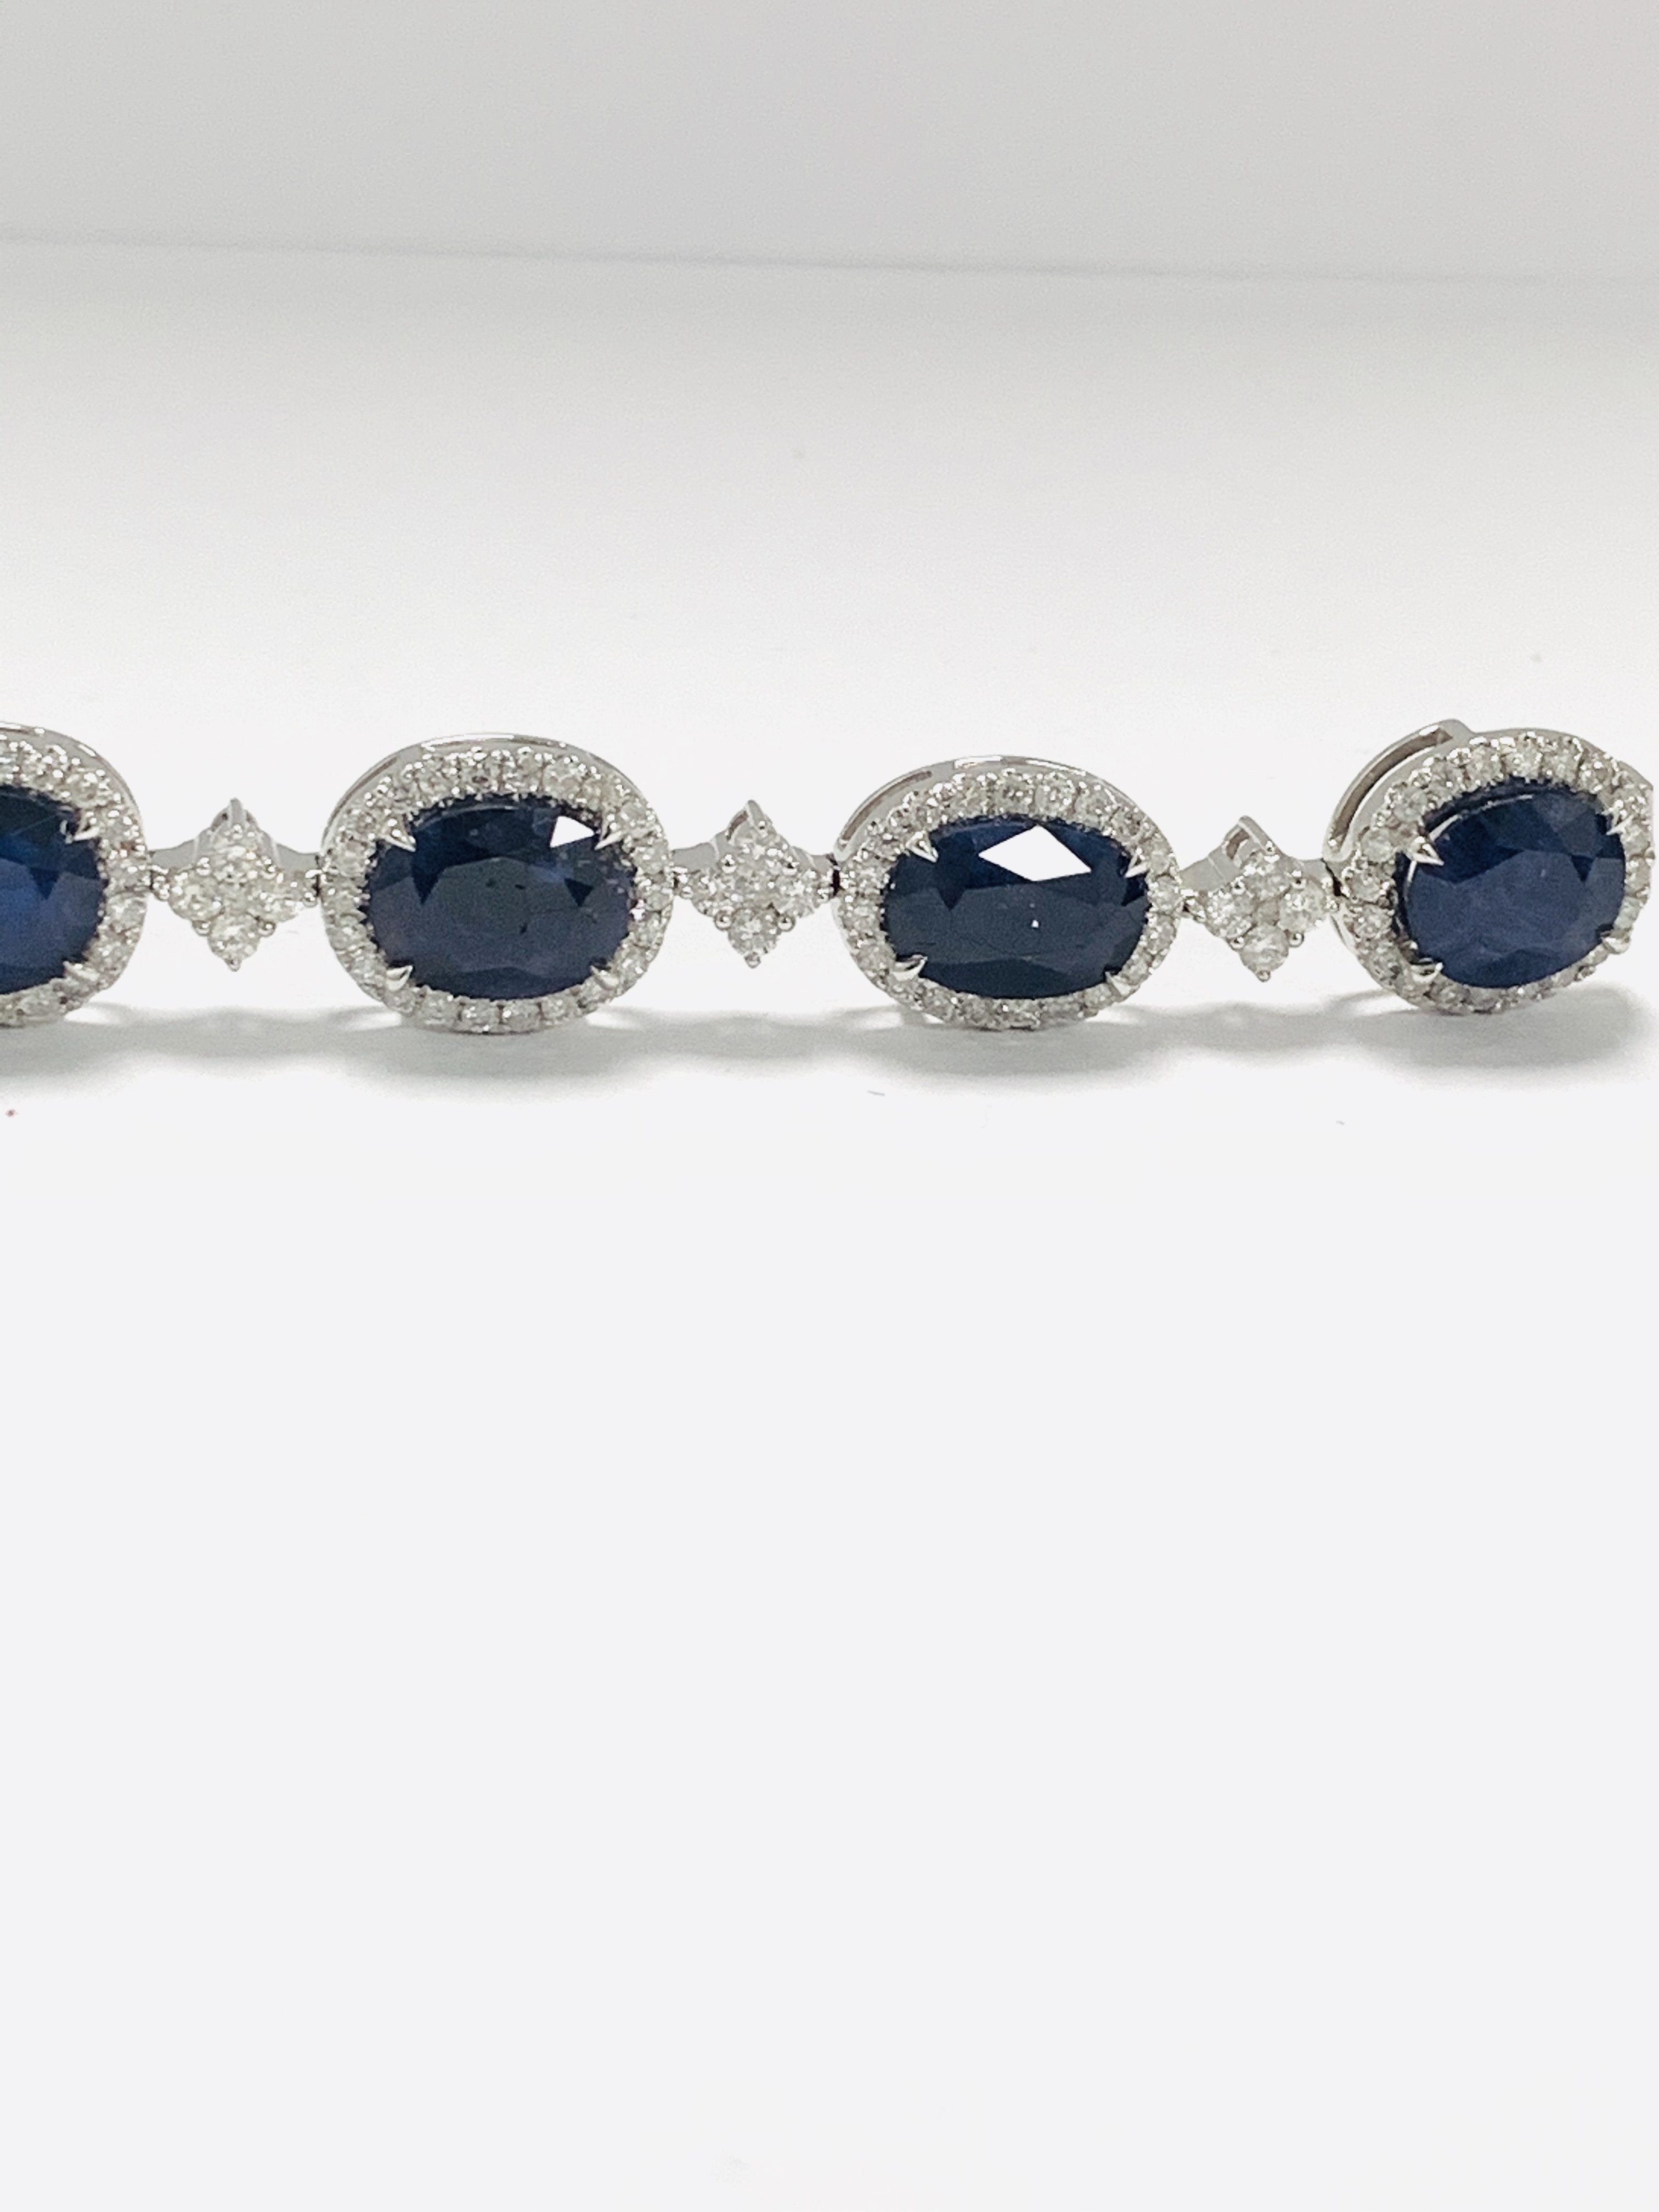 18ct White Gold Sapphire and Diamond bracelet featuring, 10 oval cut, dark blue Kashmir Sapphires (2 - Image 18 of 21